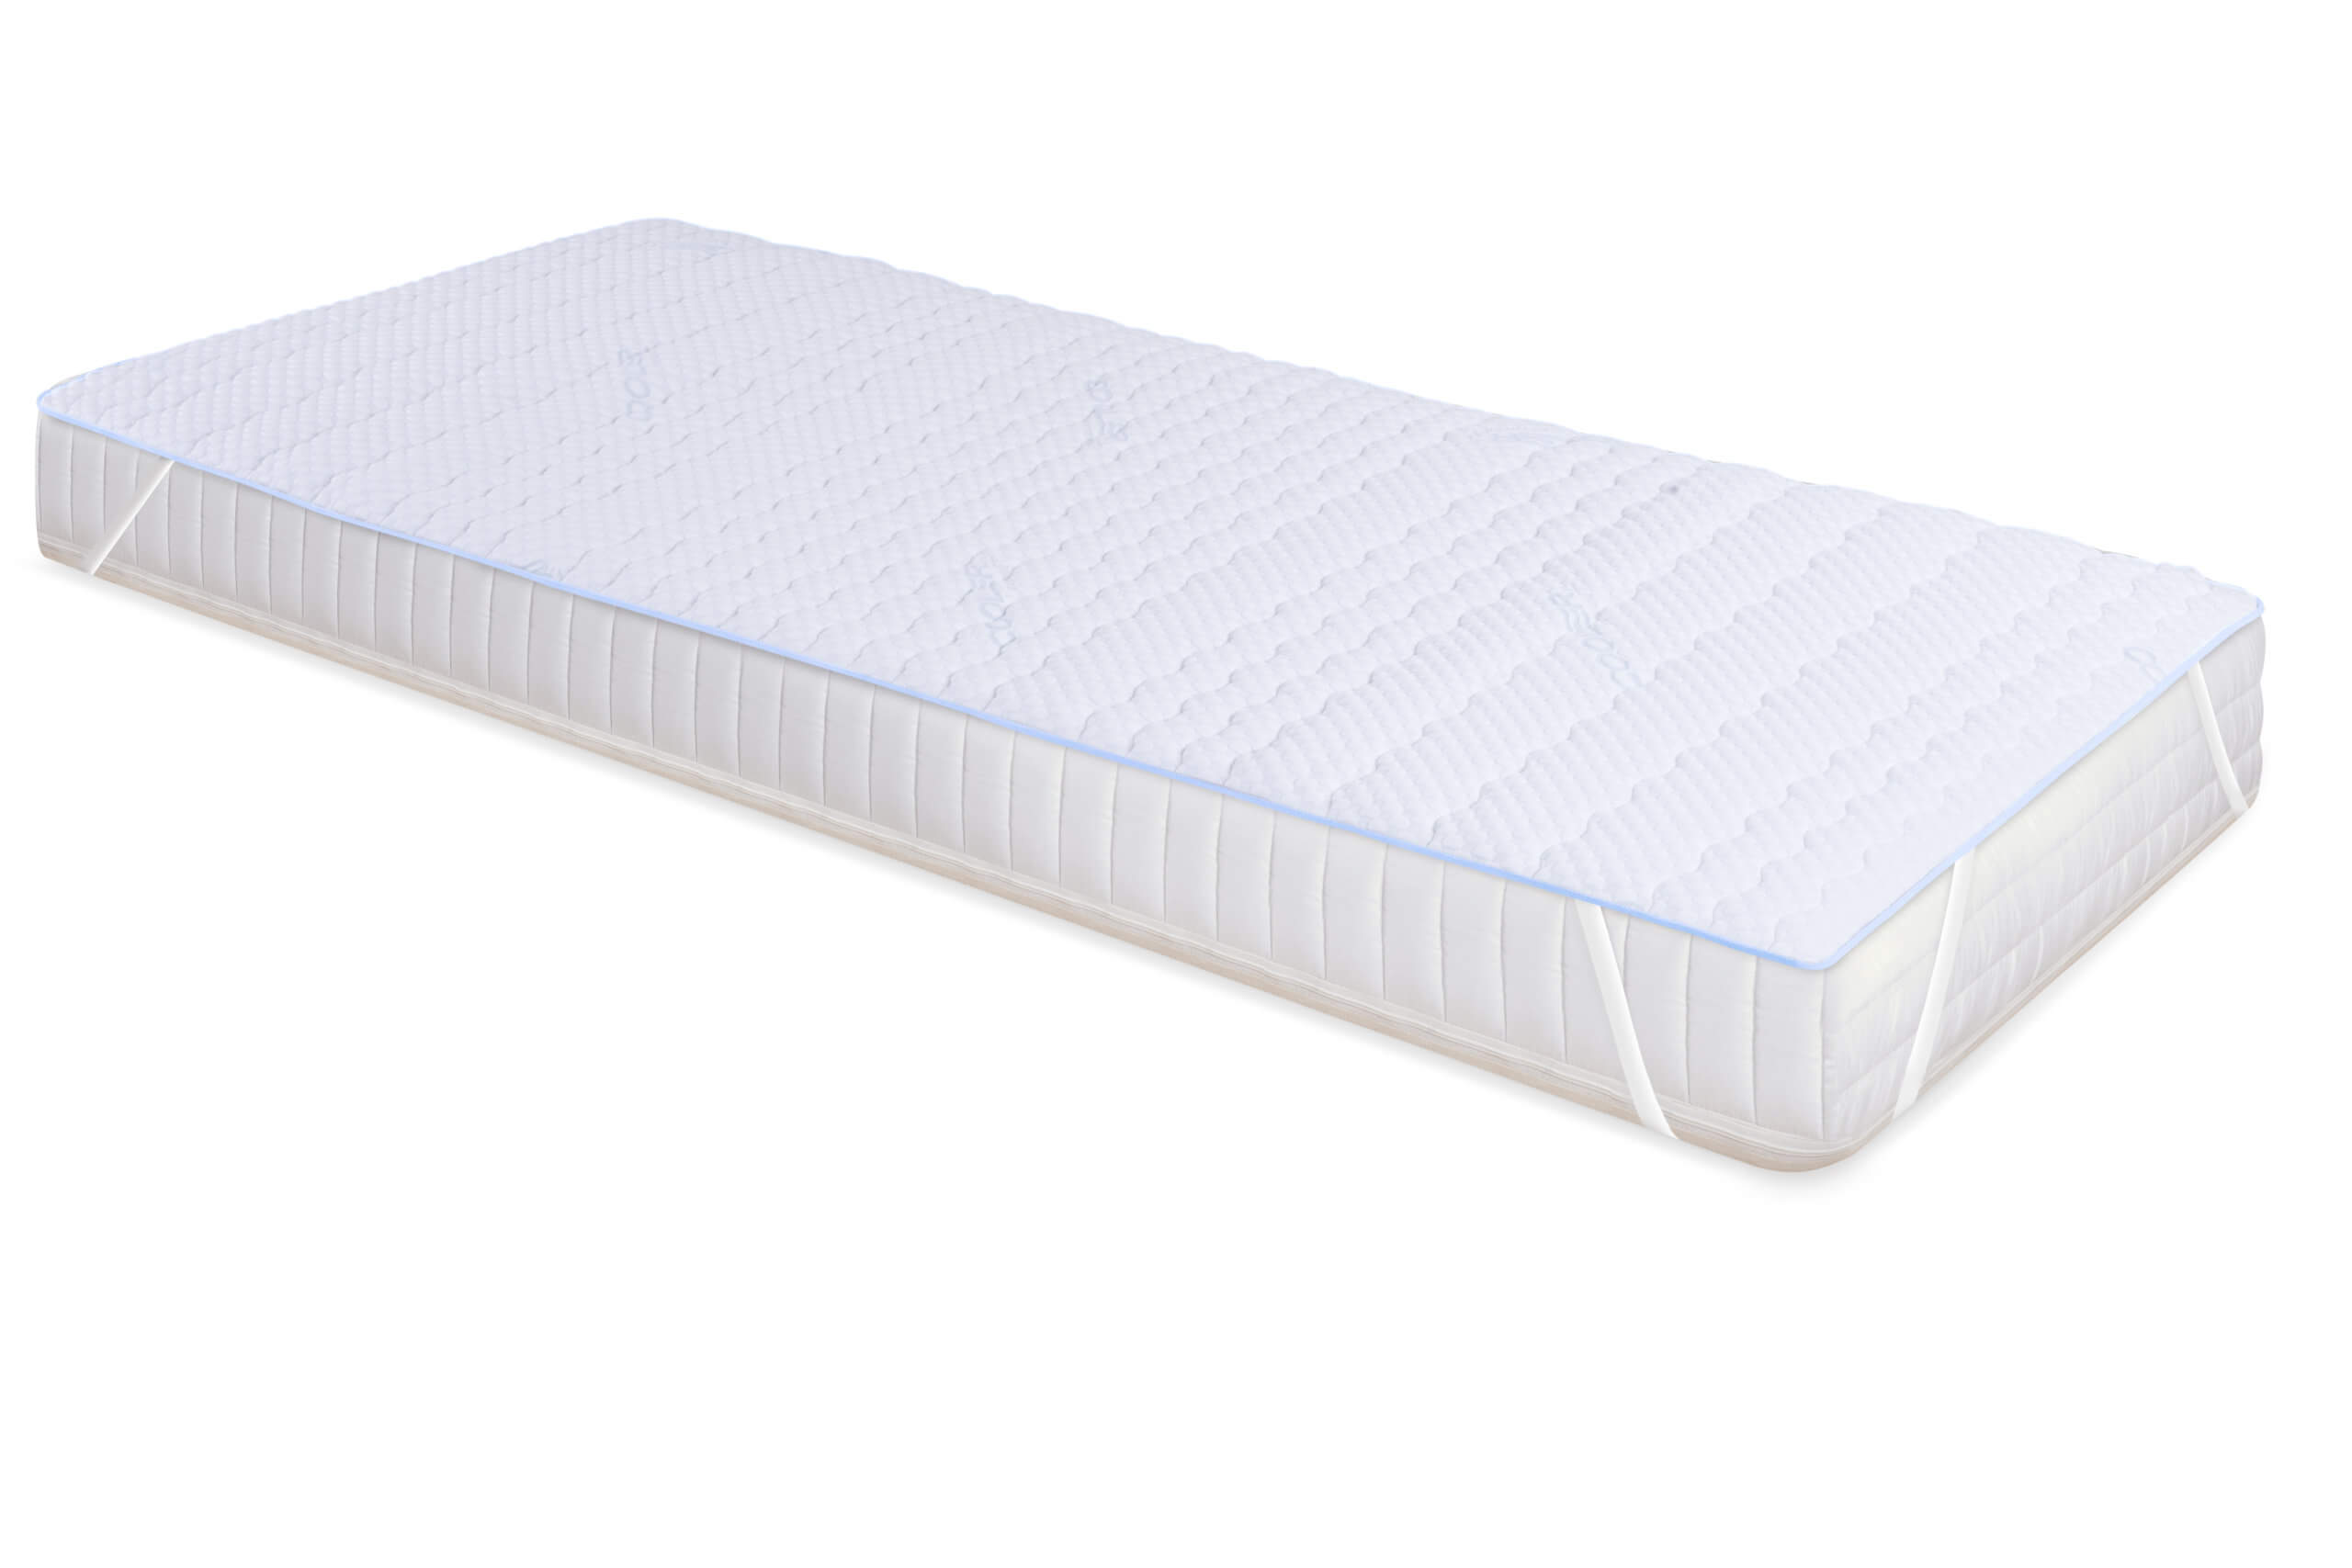 Why buy a mattress protector?